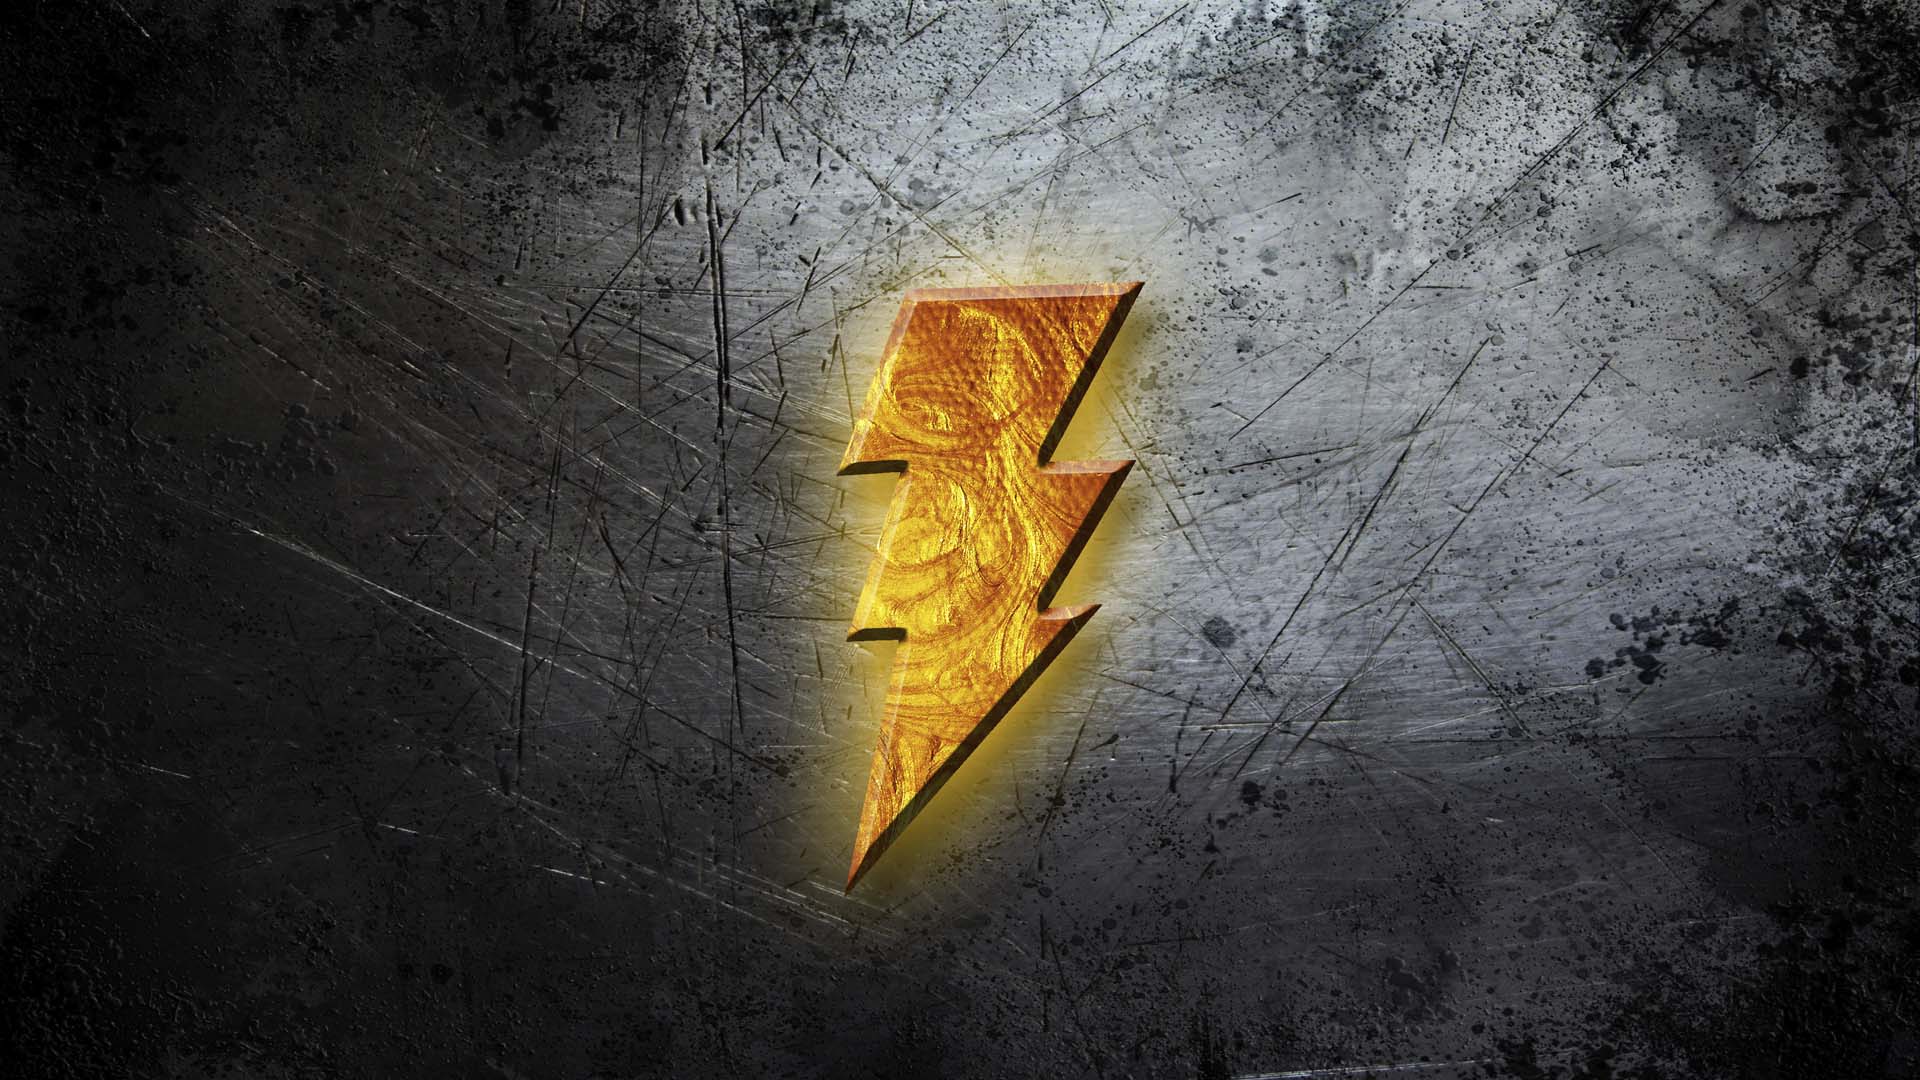 Shazam Full Movie Watch Online And HD